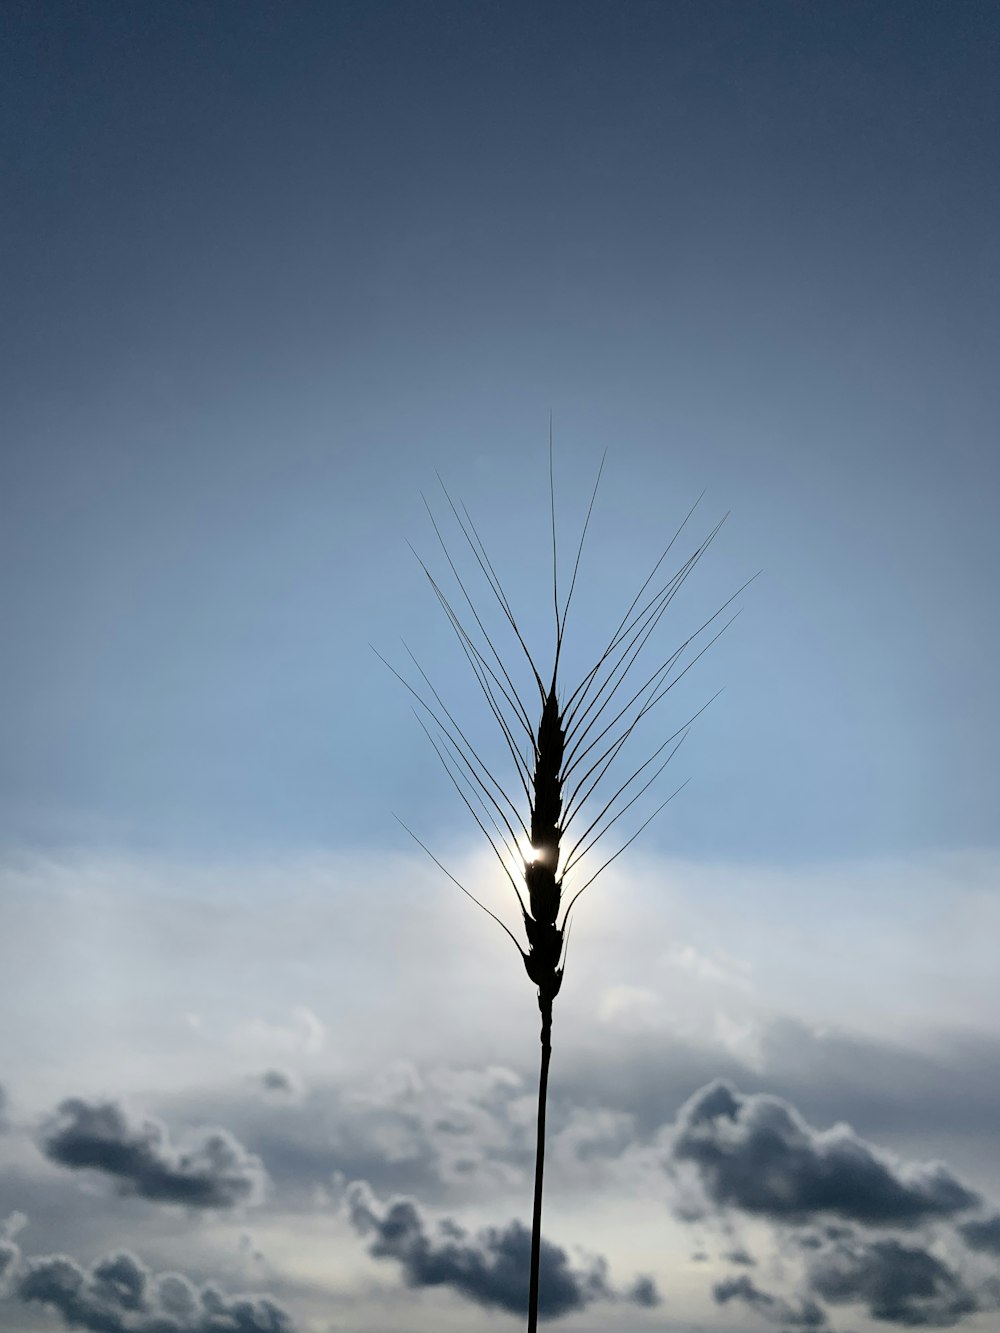 a tall stalk of grass against a cloudy sky